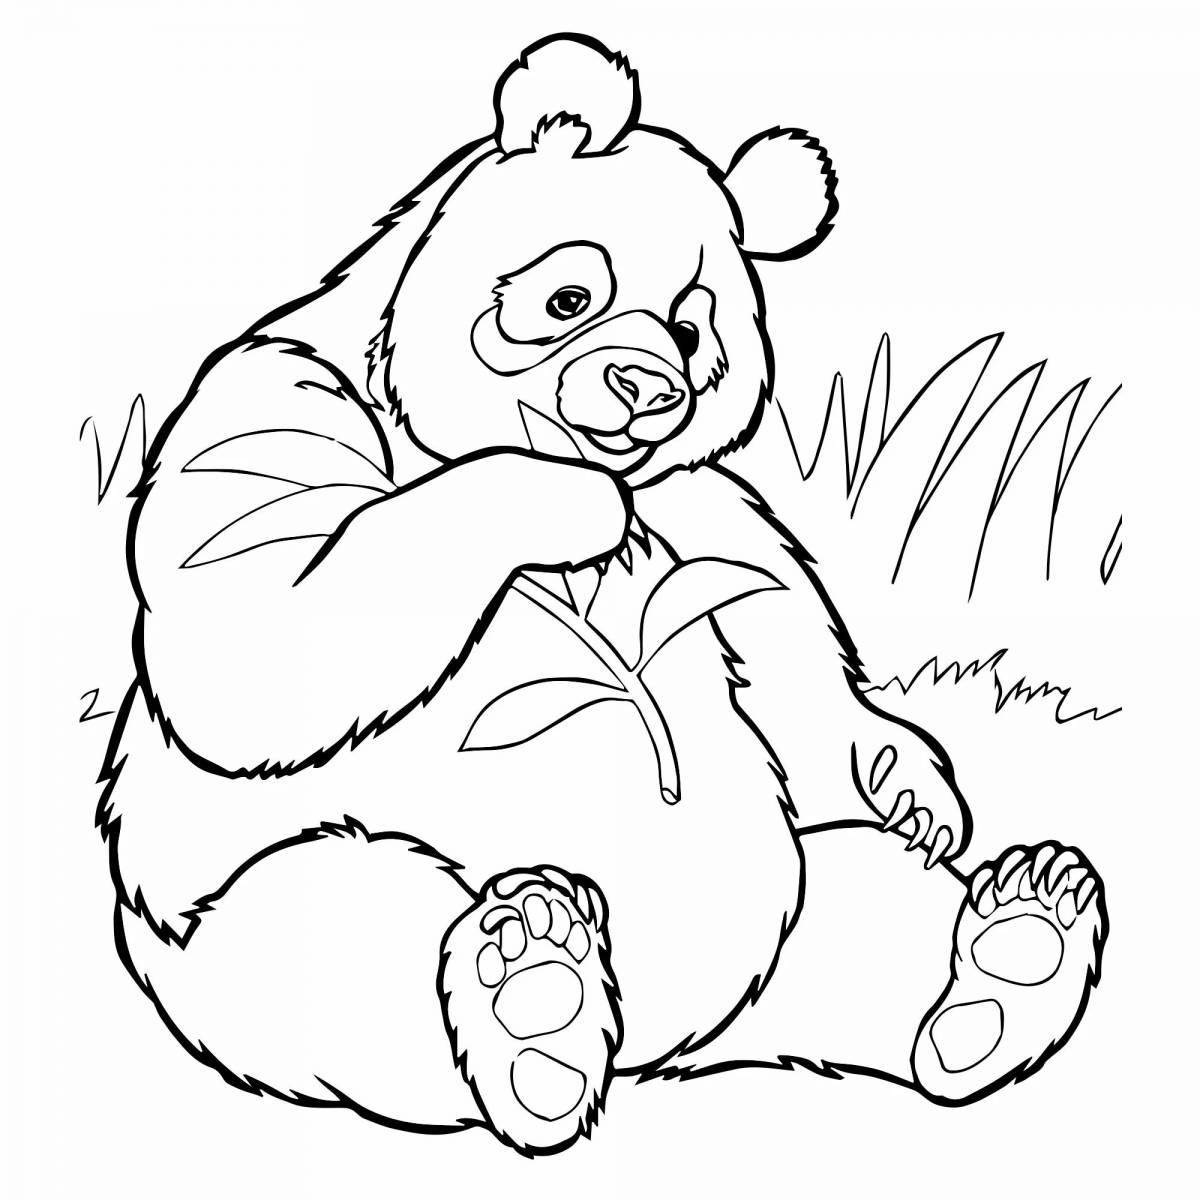 Dazzling panda coloring pages for kids